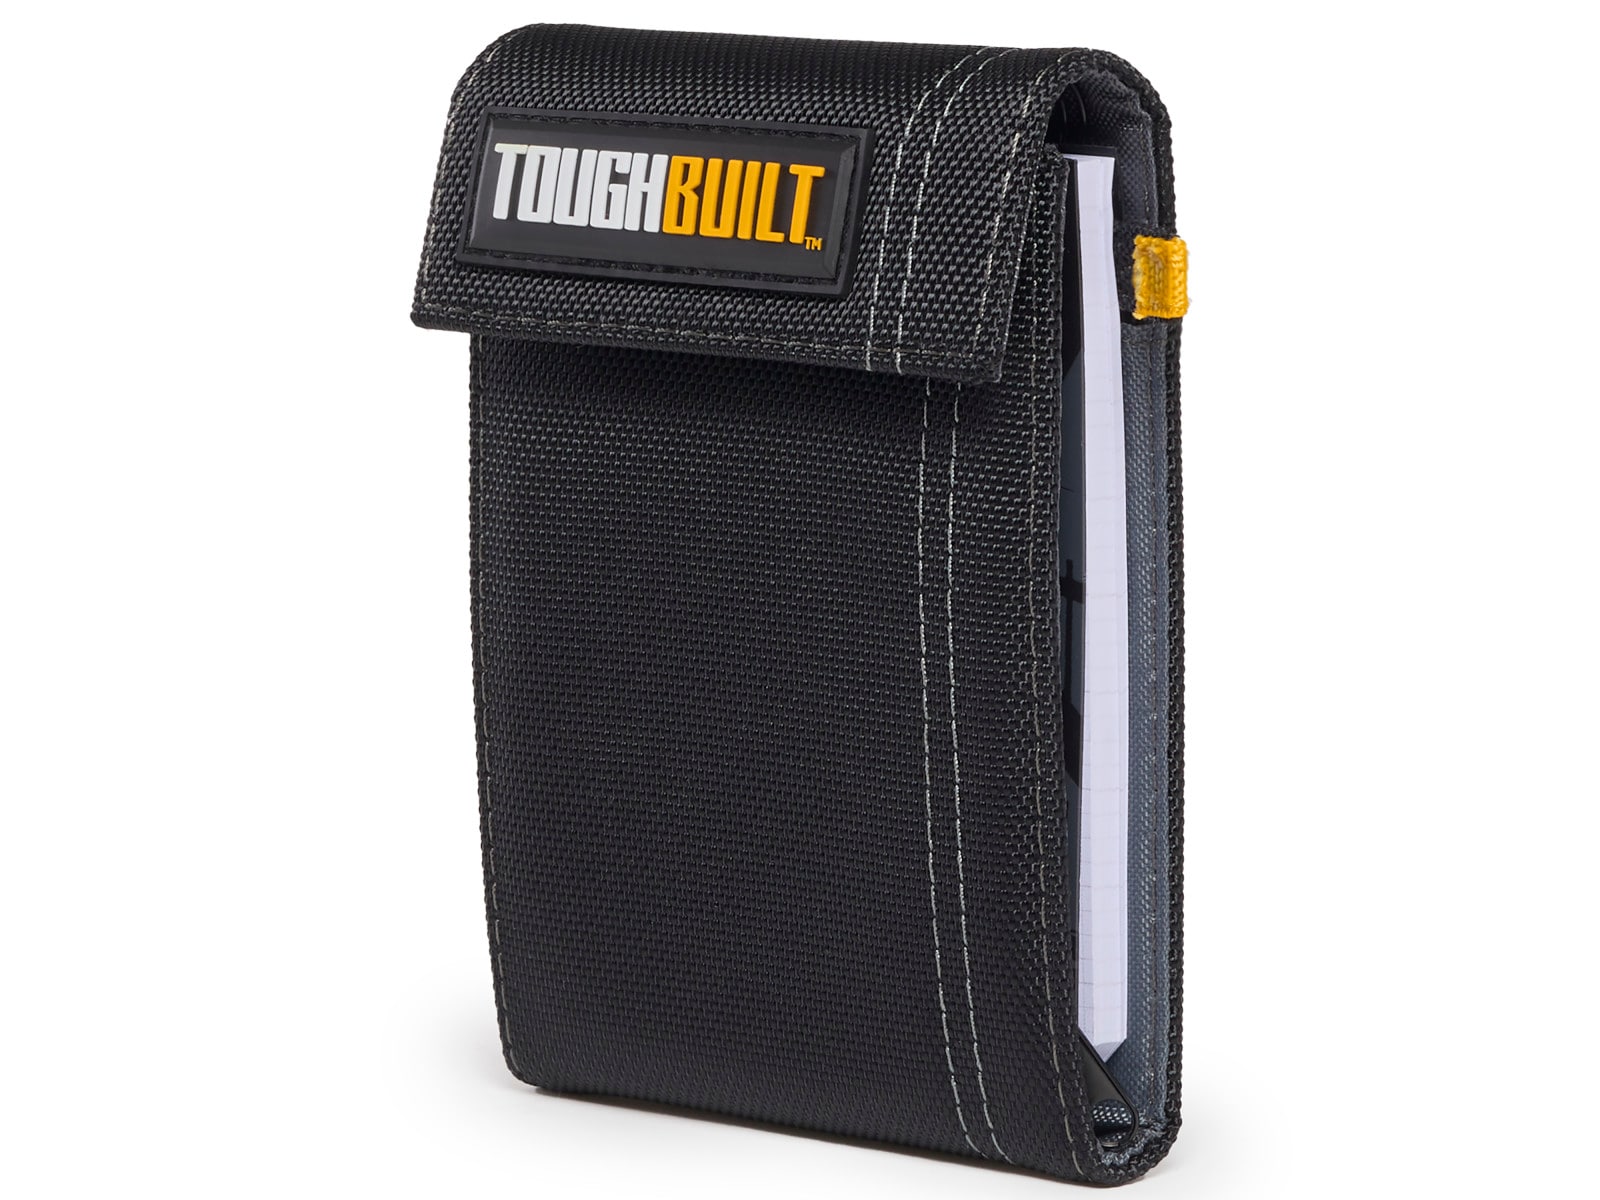 TOUGHBUILT Small Grid Notebooks with 100-sheets, heavy-gauge steel binding  and rugged cover, black (3-Pack) TB-56-S-3 - The Home Depot